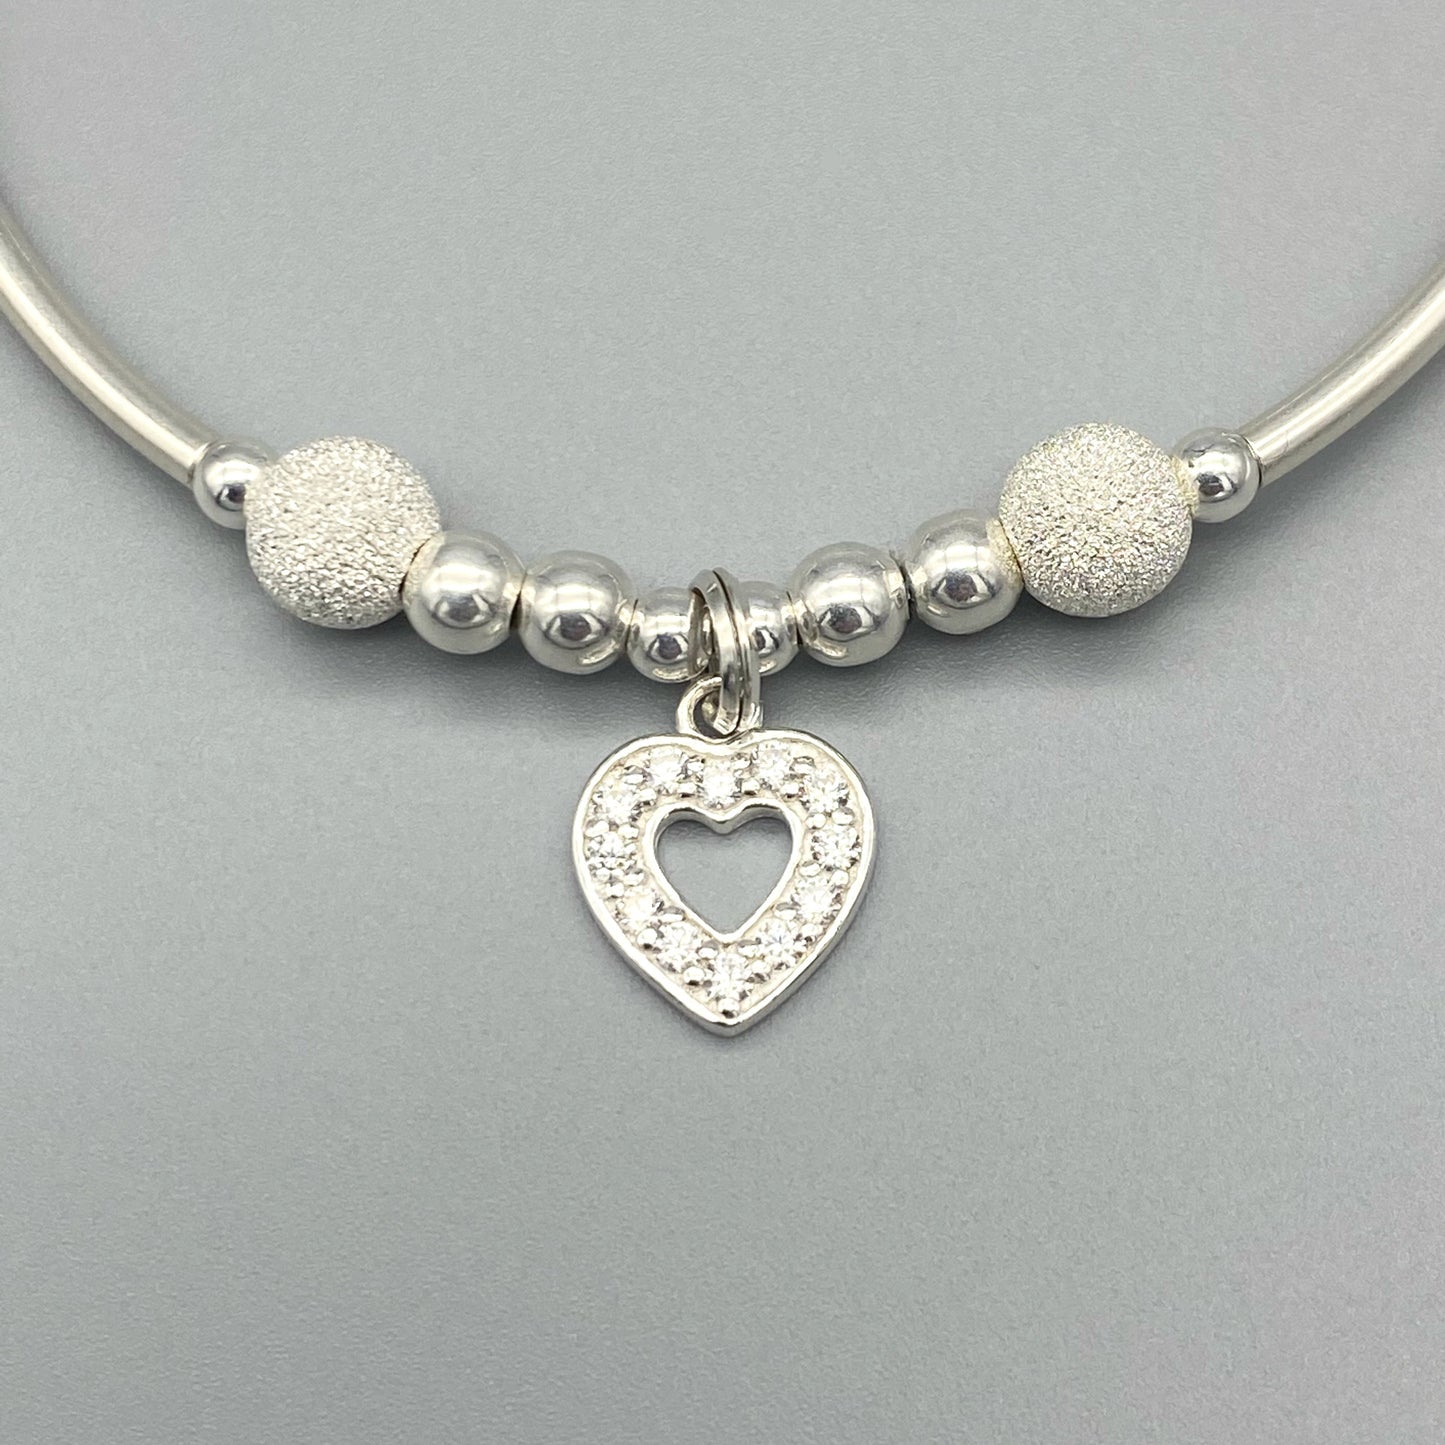 Closeup of Diamond heart charm and starburst beads women's sterling silver stacking bracelet by My Silver Wish